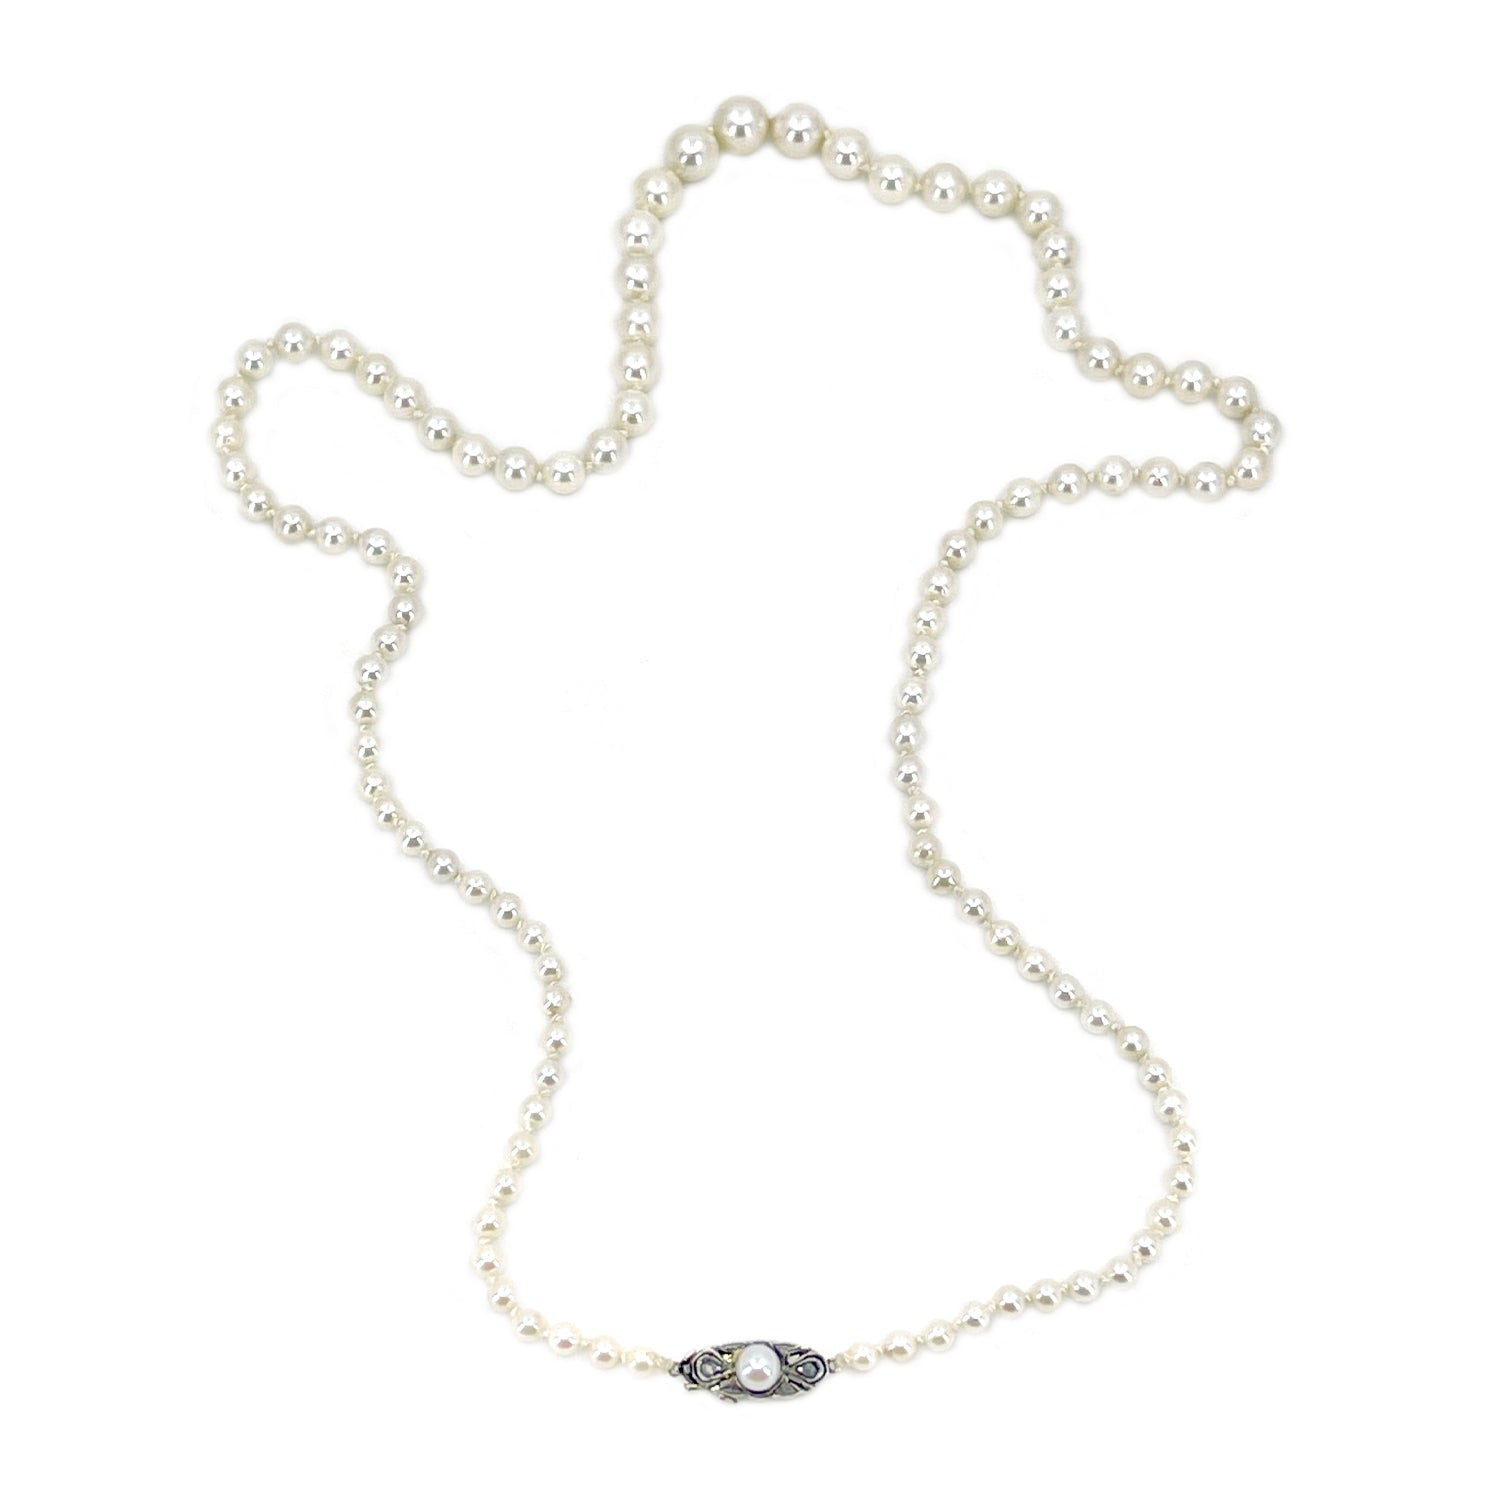 Antique Rough Diamond Graduated Japanese Saltwater Cultured Akoya Pearl Necklace - 18K Yellow Gold Sterling Silver 21.50 Inch